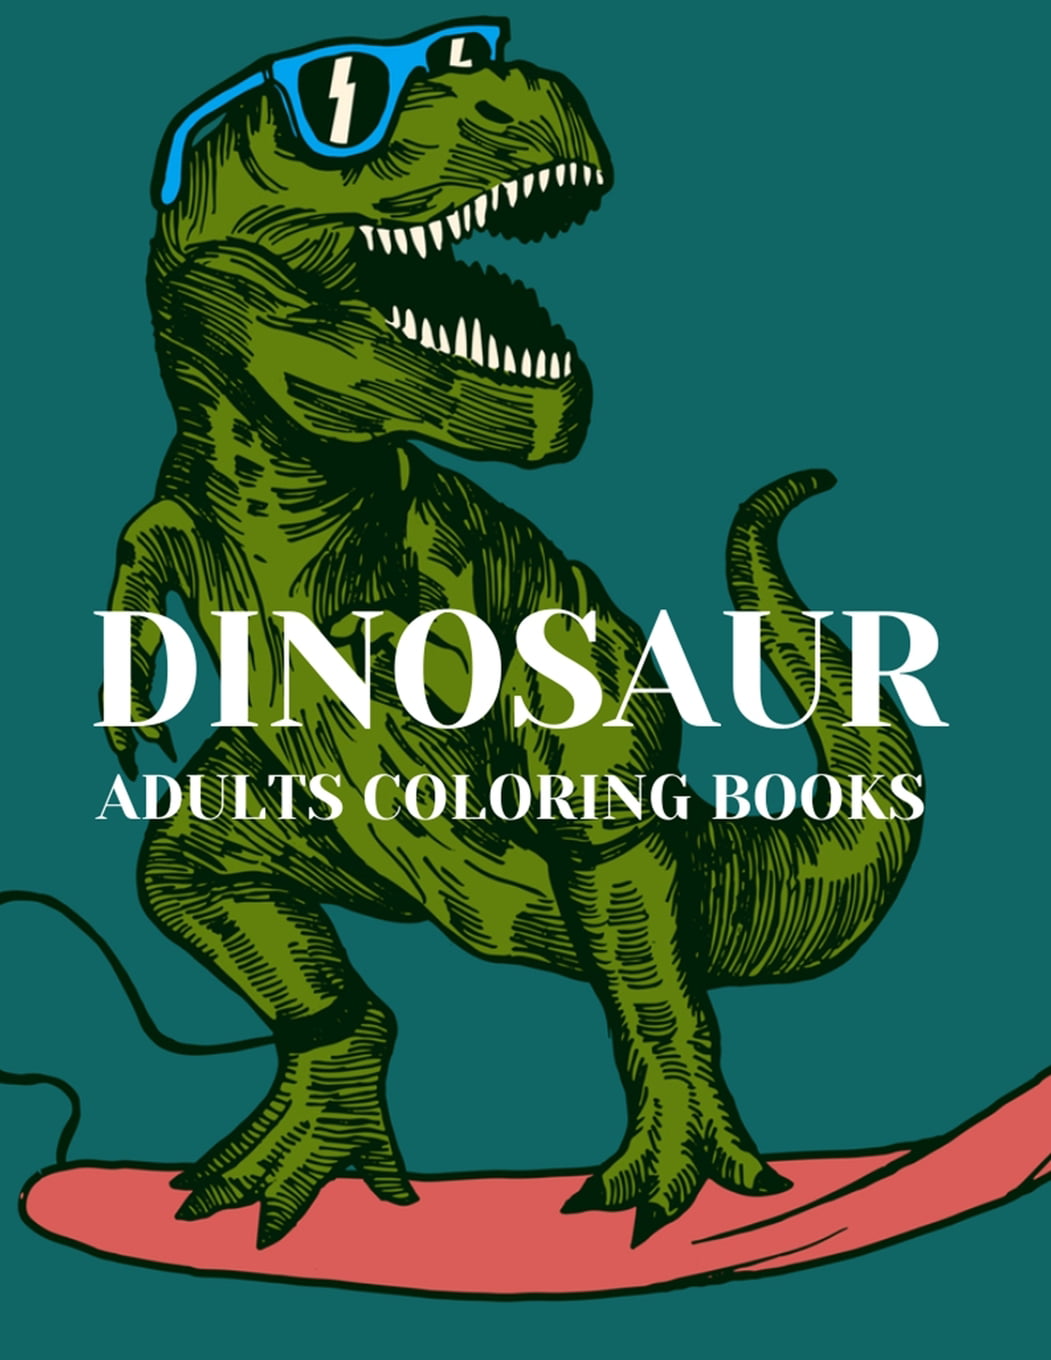 Dinosaur adults coloring books Stressrelief Coloring